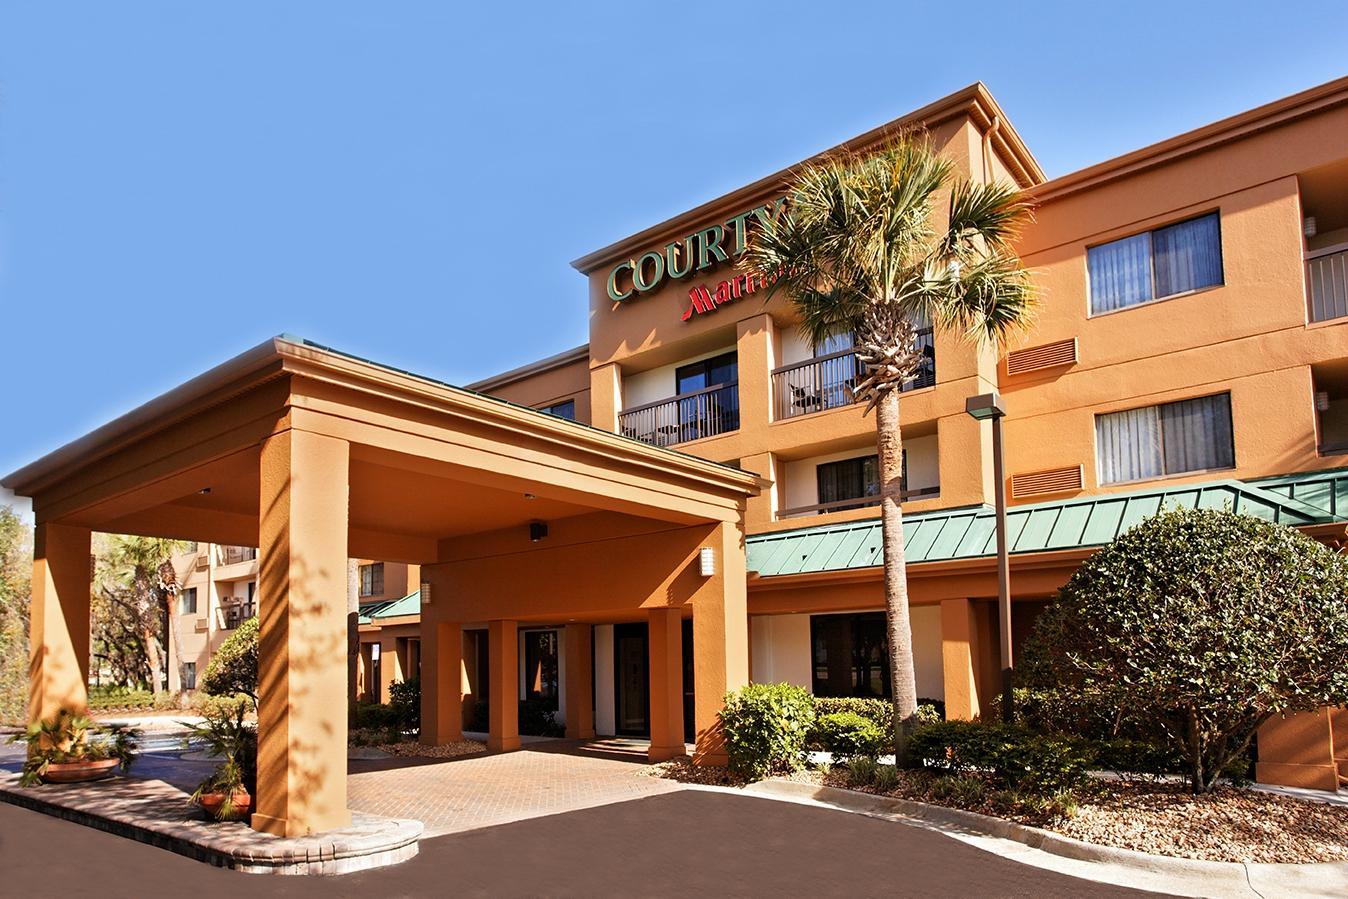 Photo of Courtyard by Marriott Tampa North/I-75 Fletcher, Tampa, FL